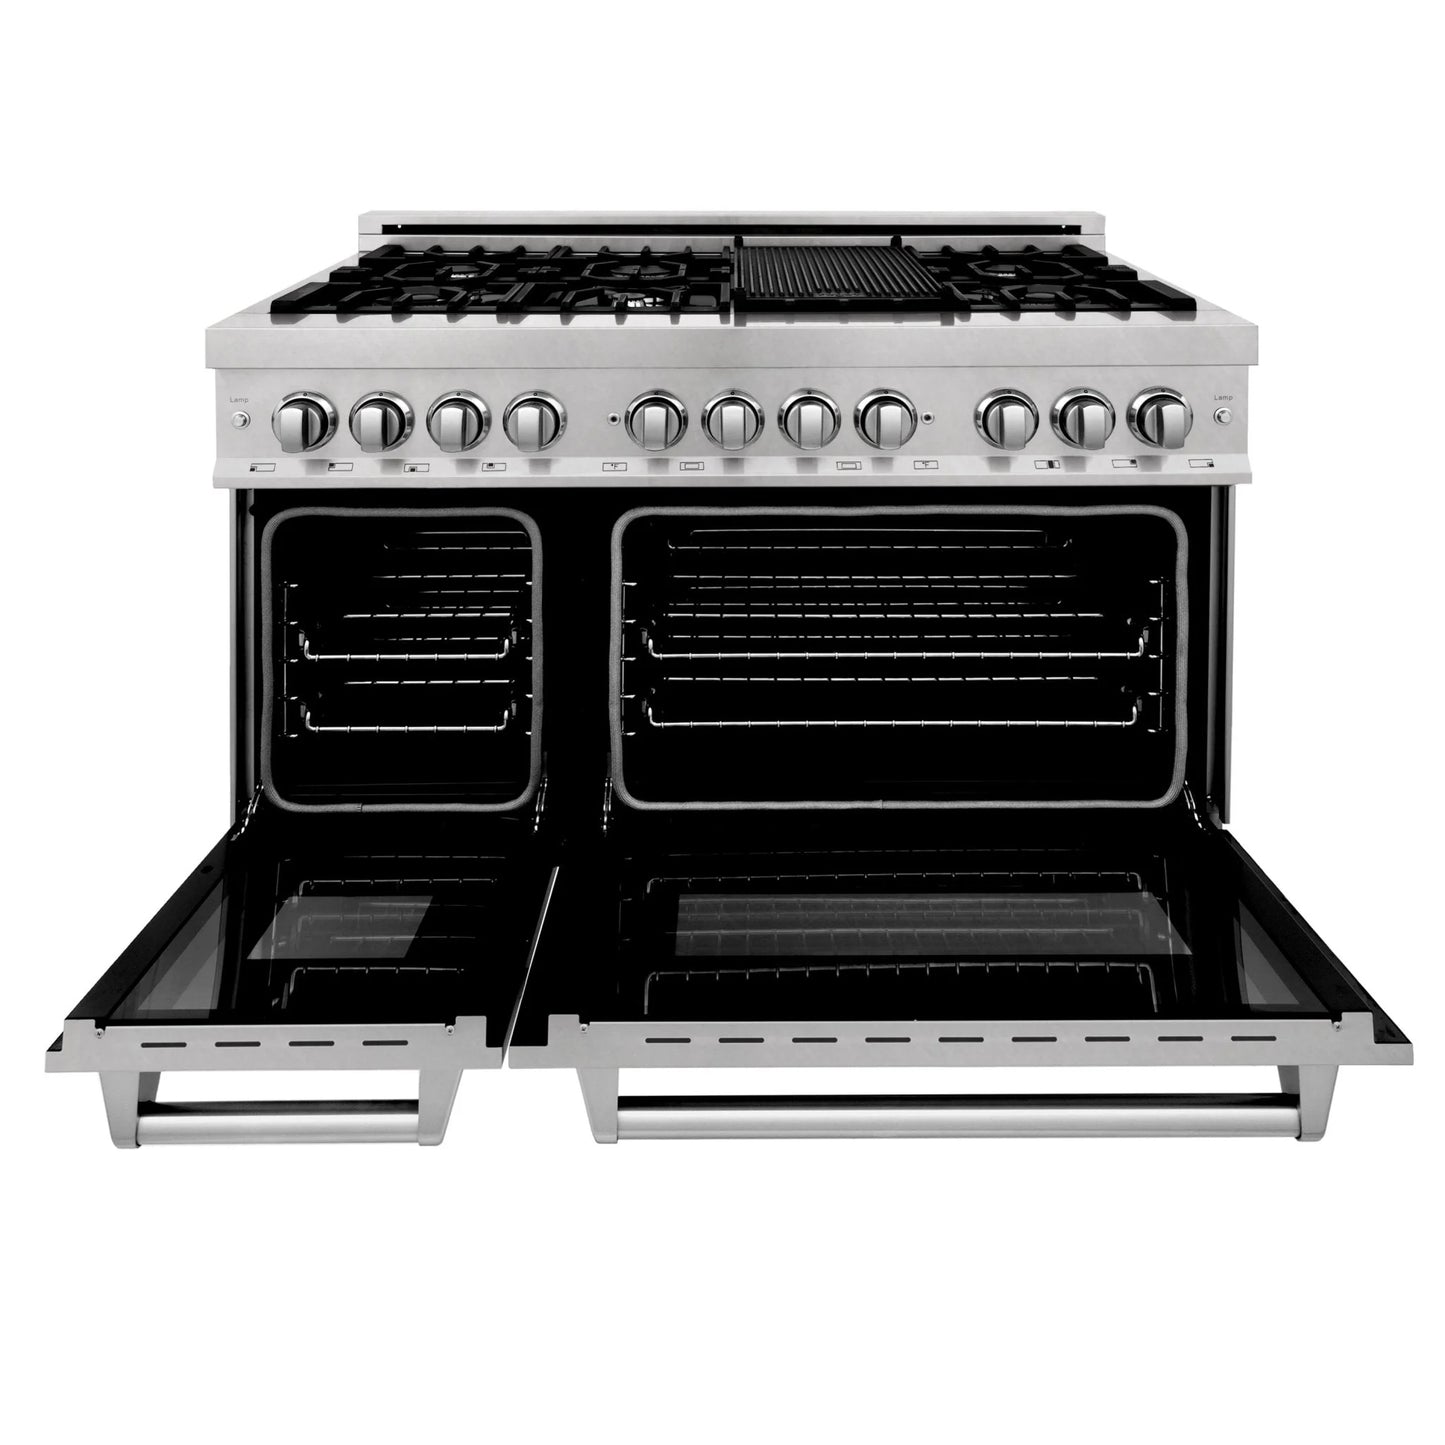 ZLINE 48 in. Dual Fuel Range with Gas Stove and Electric Oven in All Fingerprint Resistant Stainless Steel (RAS-SN-48)